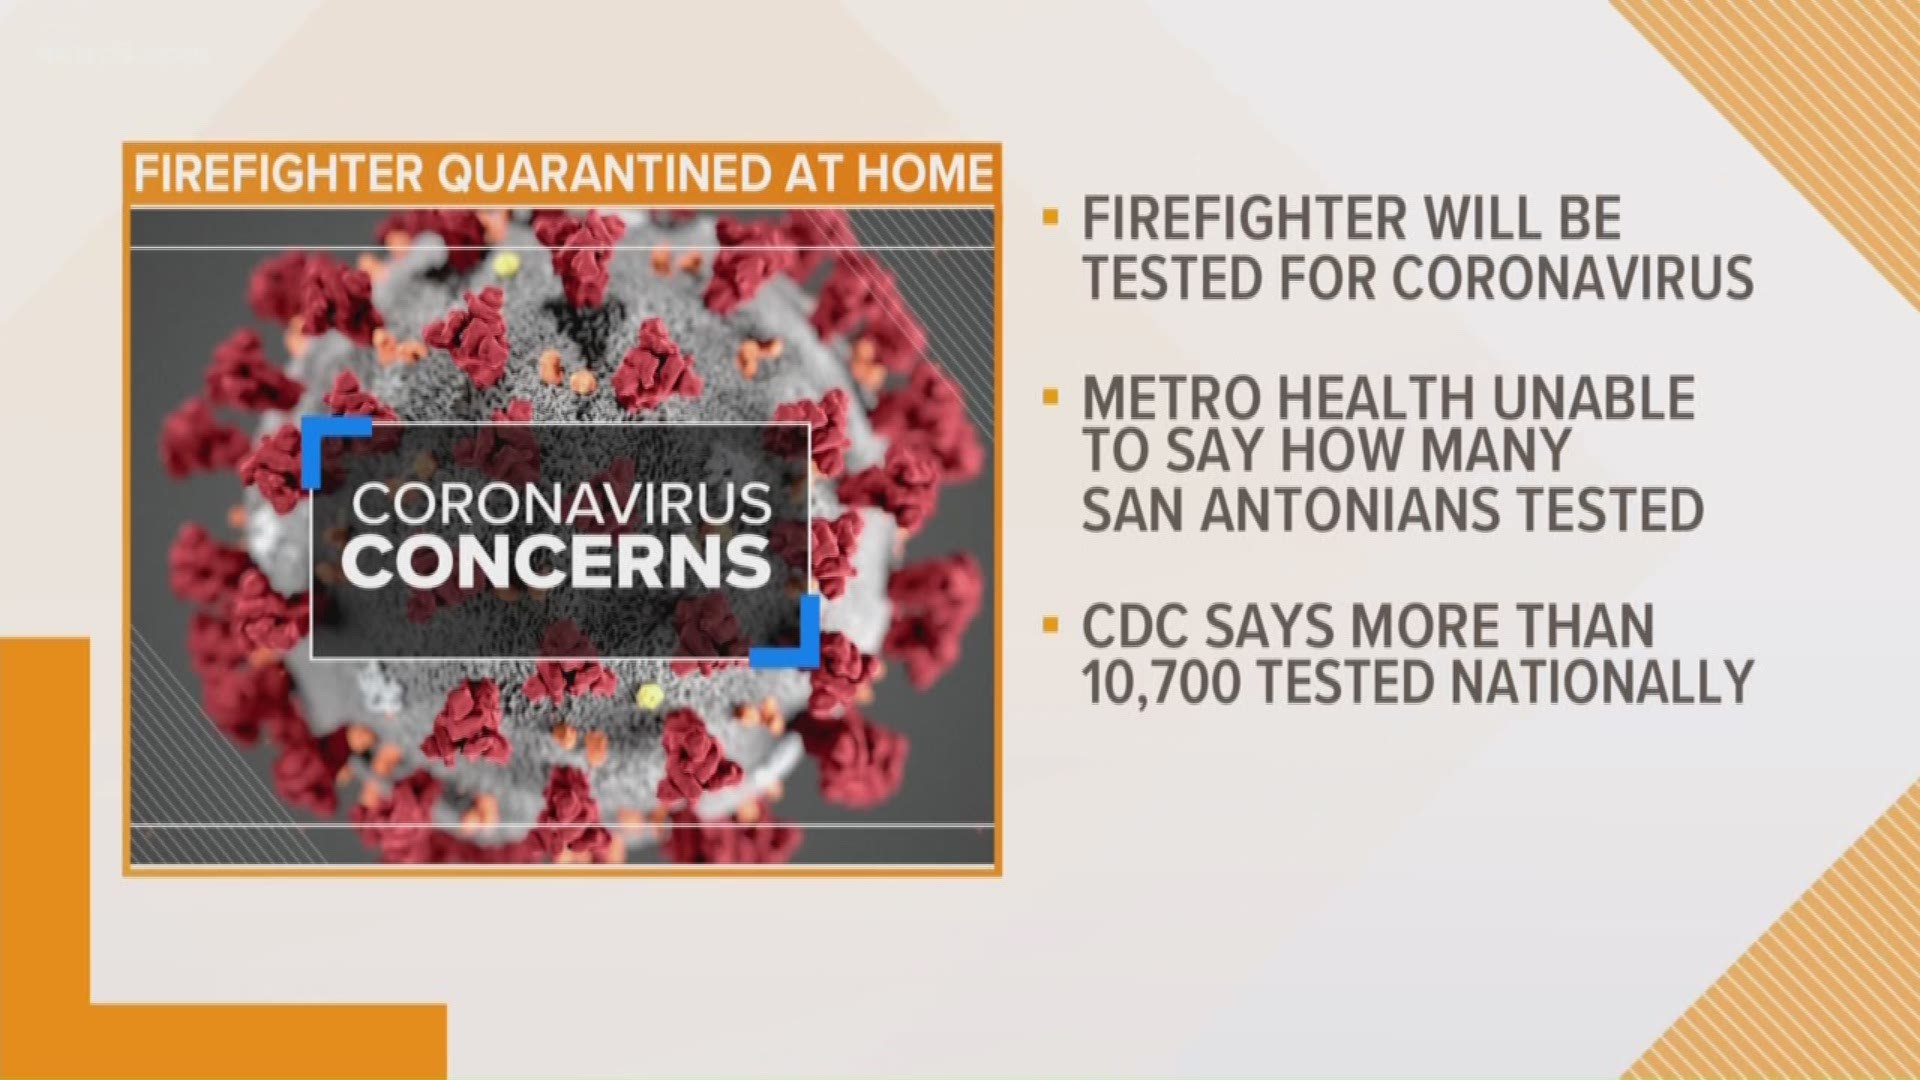 A firefighter with the San Antonio Fire Department is being tested for coronavirus after experiencing flu-like symptoms.